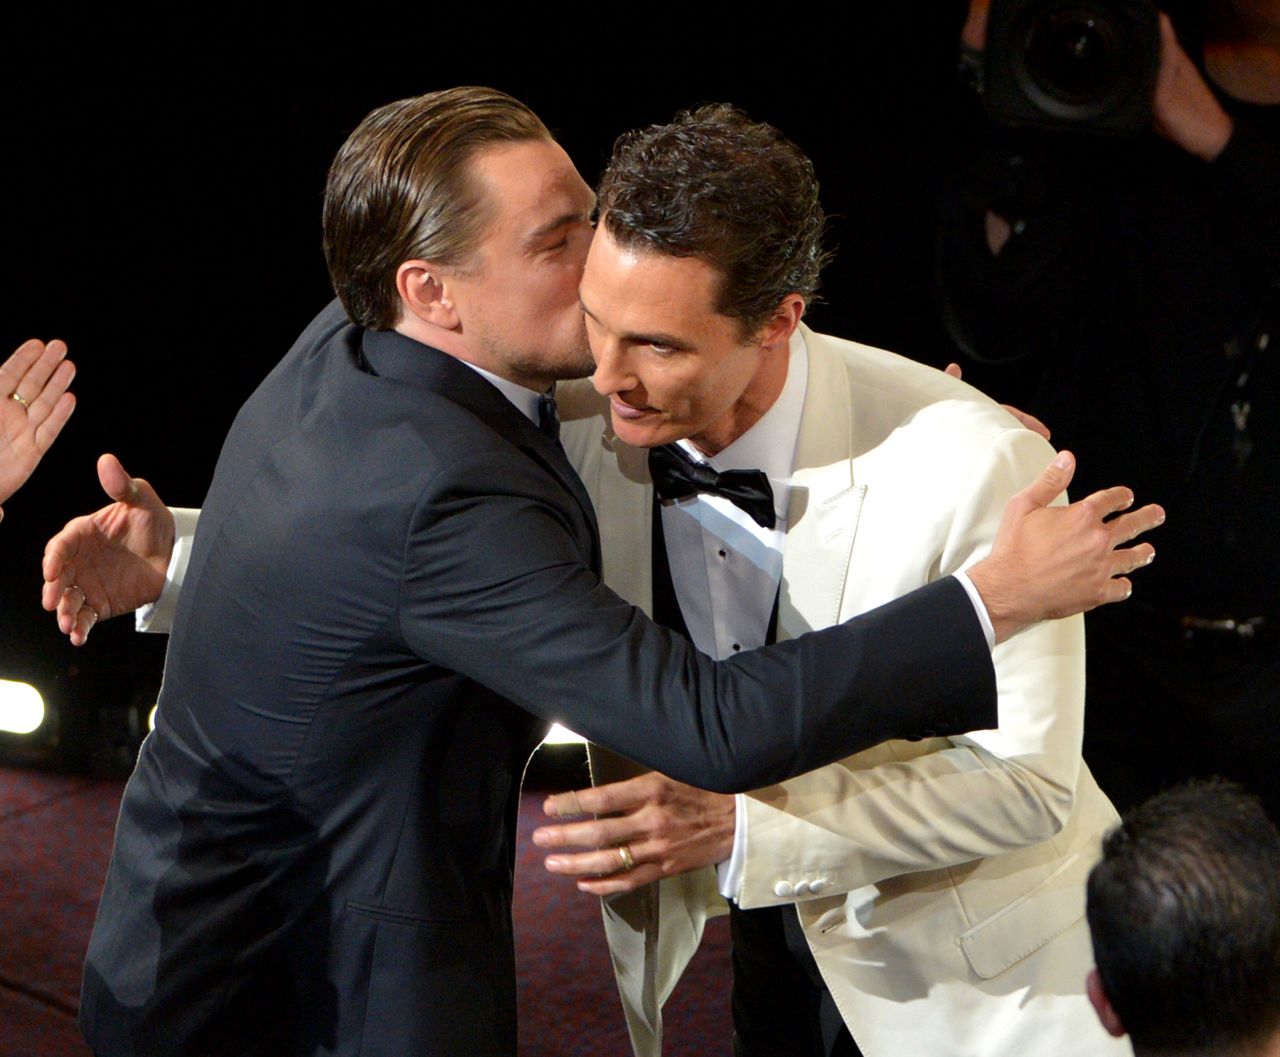 Leonardo DiCaprio, left, congratulates Matthew McConaughey for winning the best actor Oscar for "Dallas Buyers Club." DiCaprio, who starred in "The Wolf of Wall Street," was also up for the award.